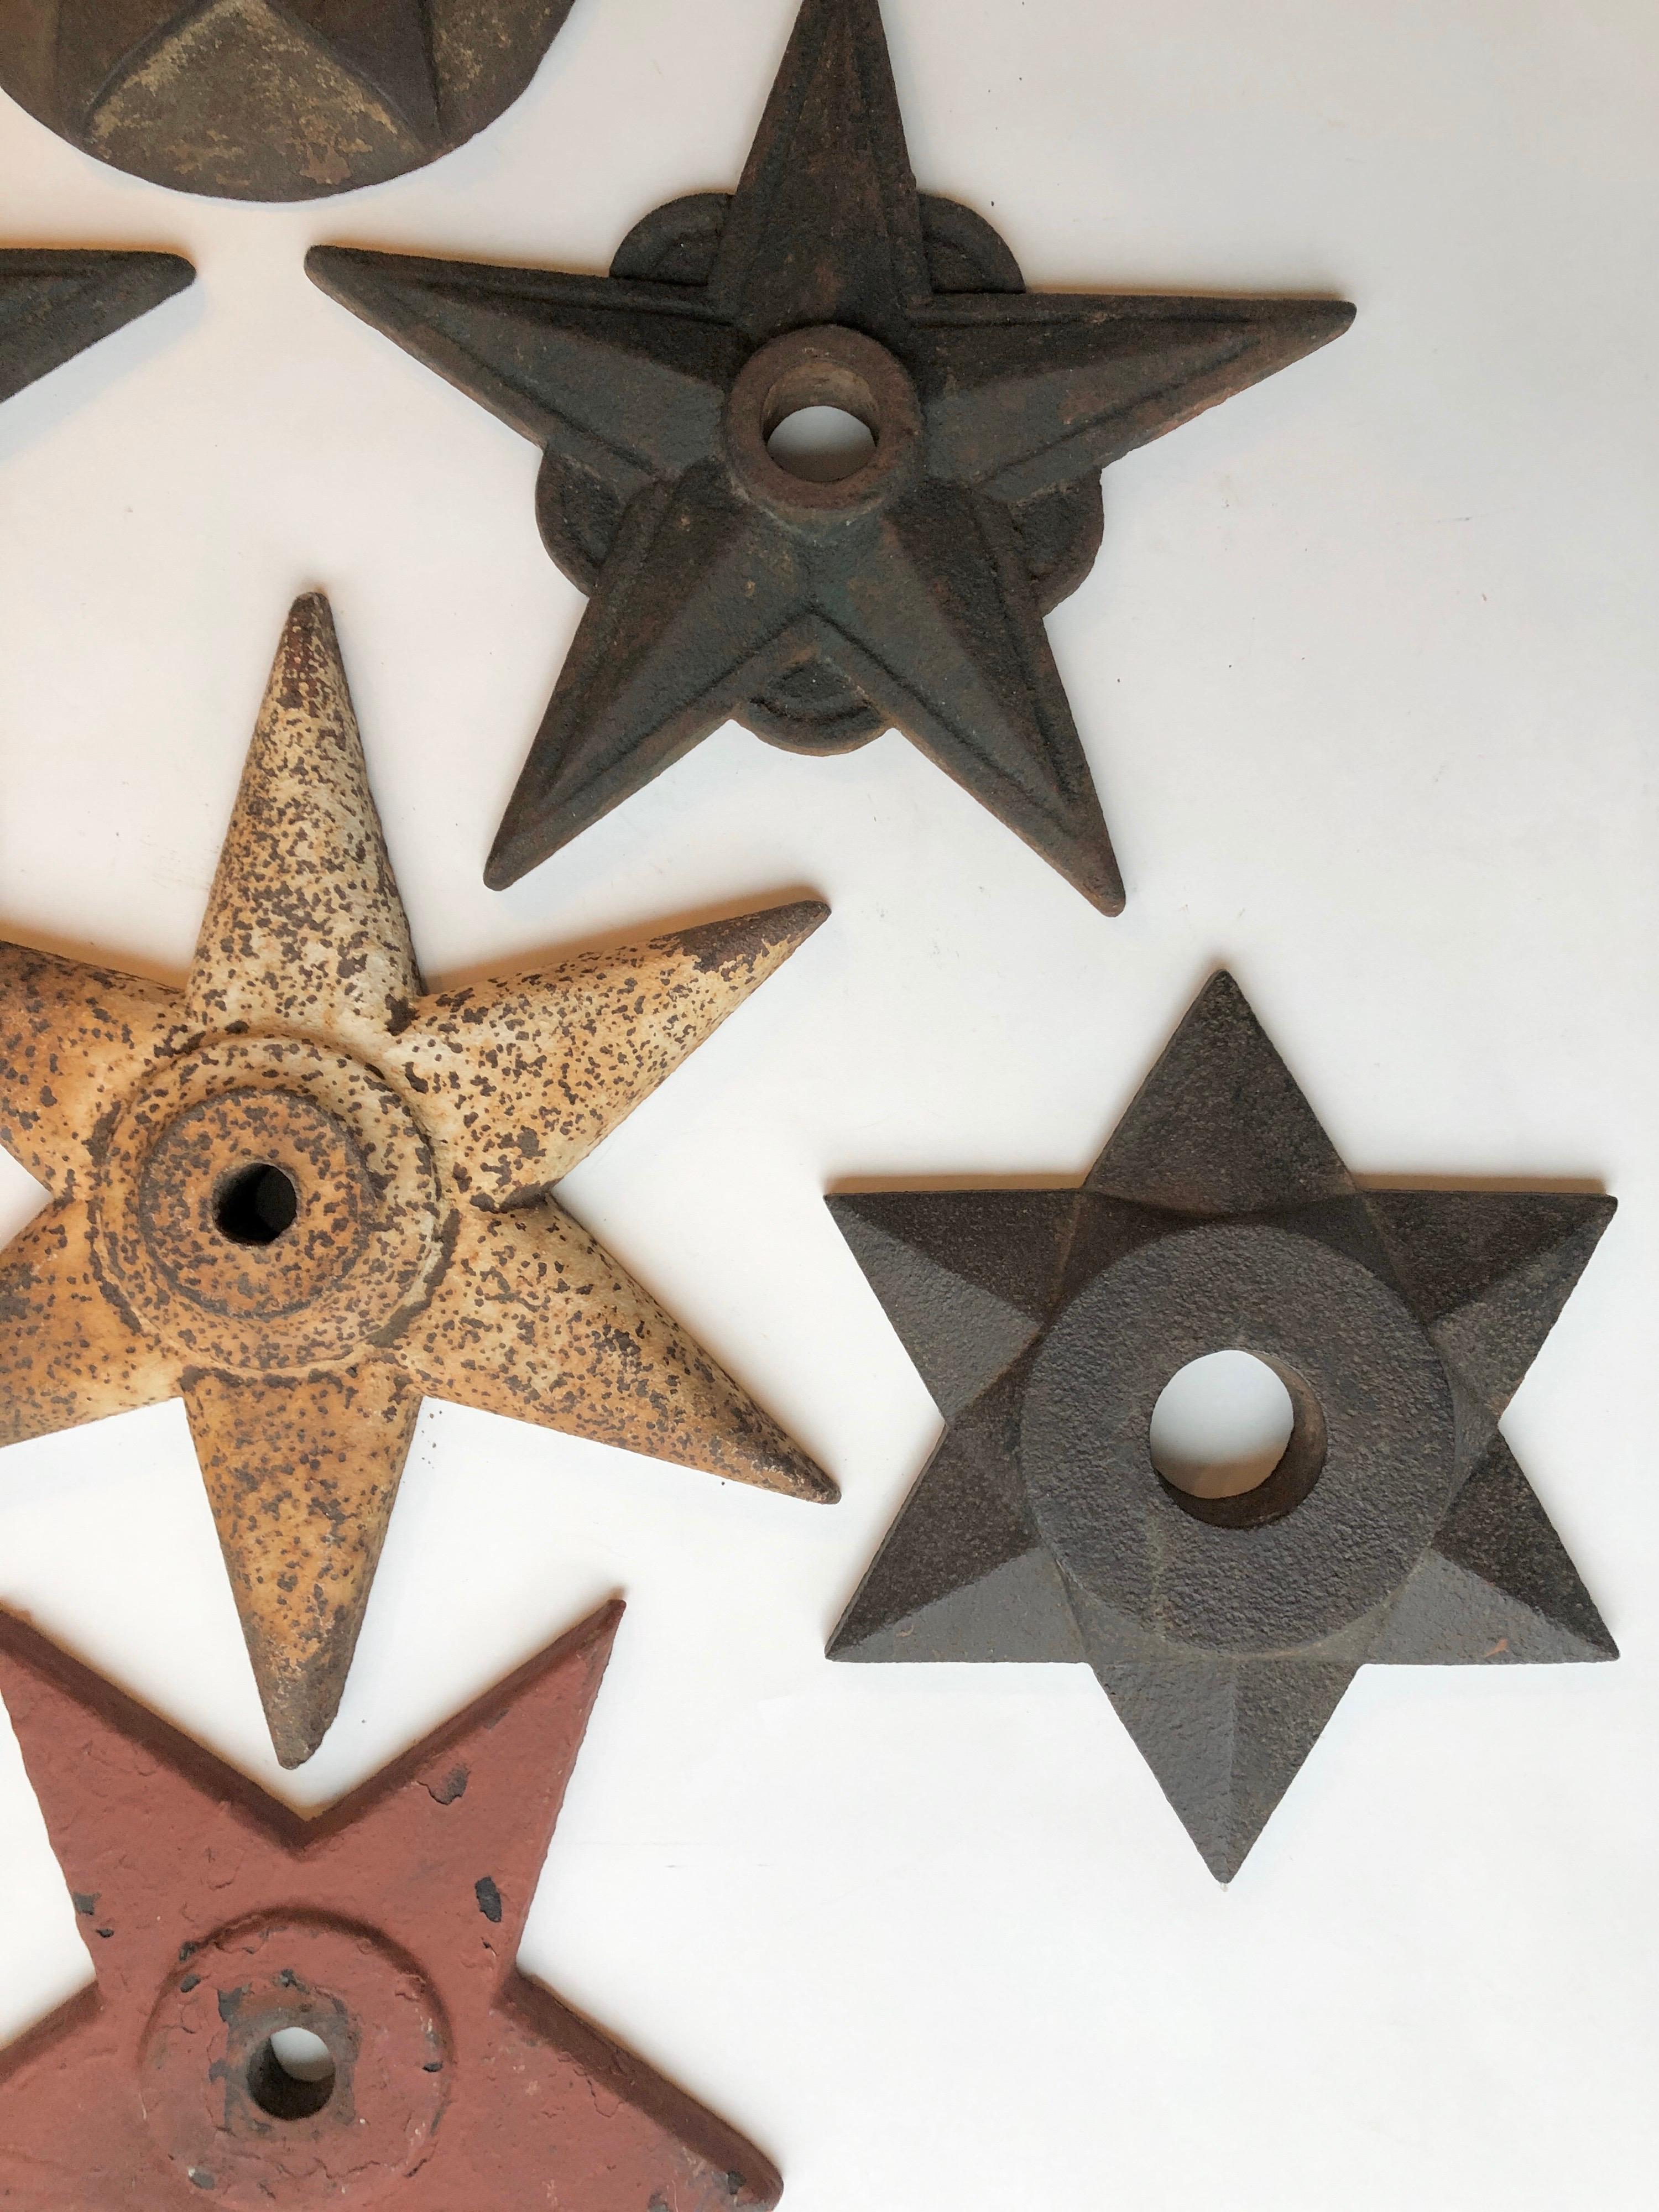 American Classical Antique Cast Iron Architectural Building Star Shaped Support Collection '7'